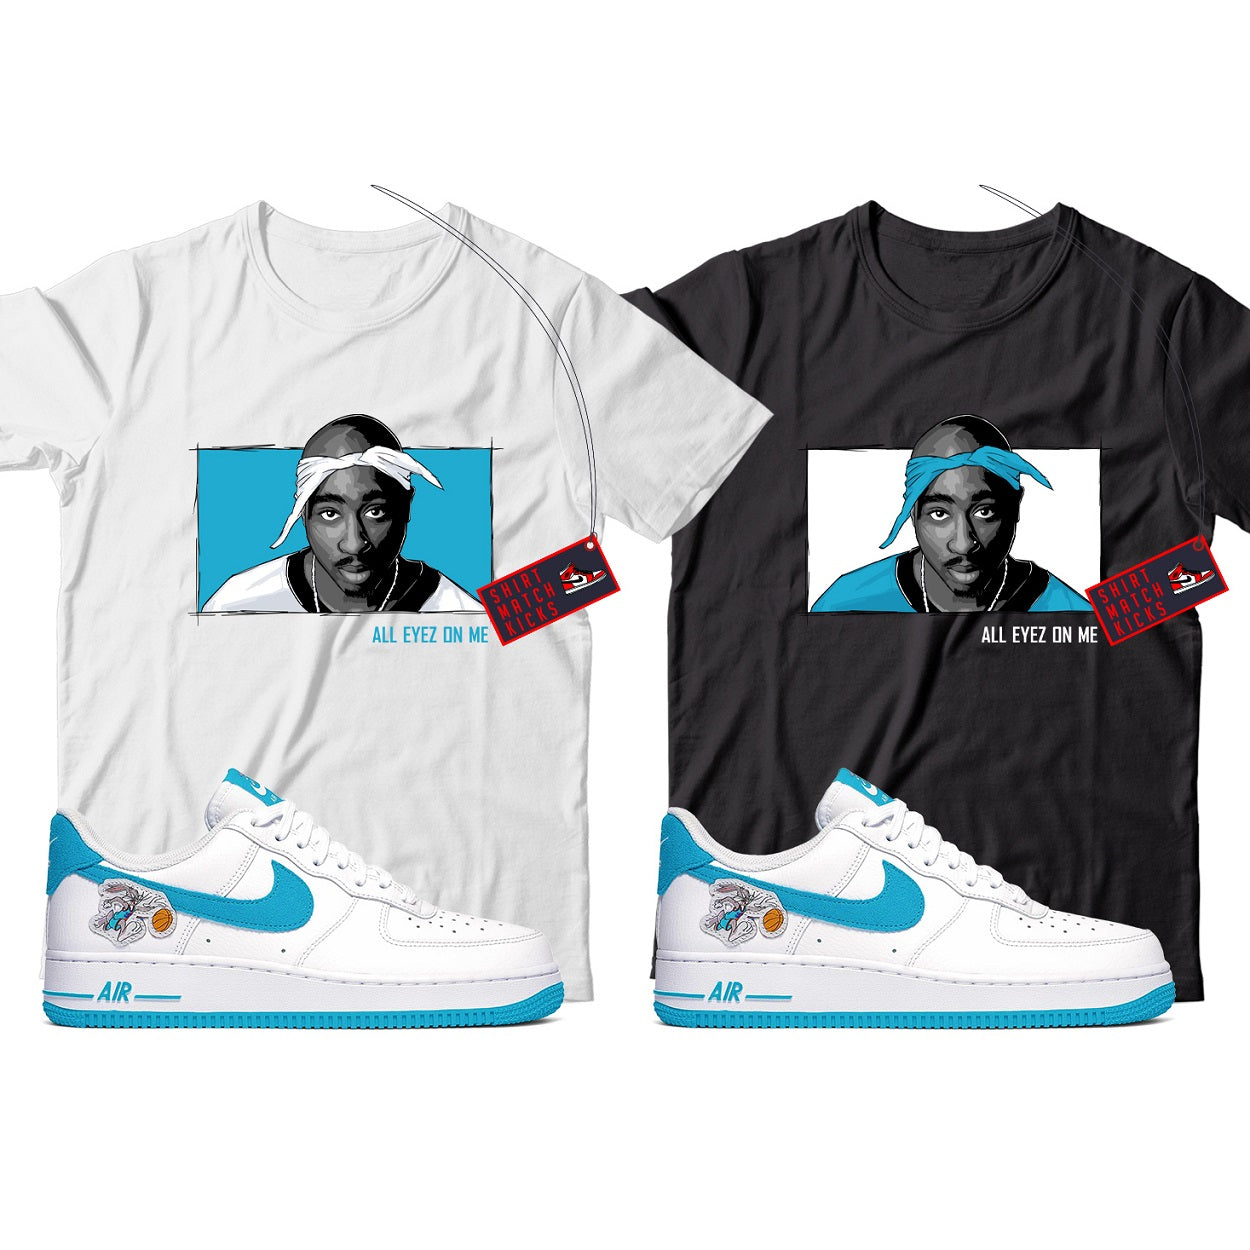 2 Pac T-Shirt Match Nike Air Force 1 Low Hare Space Jam